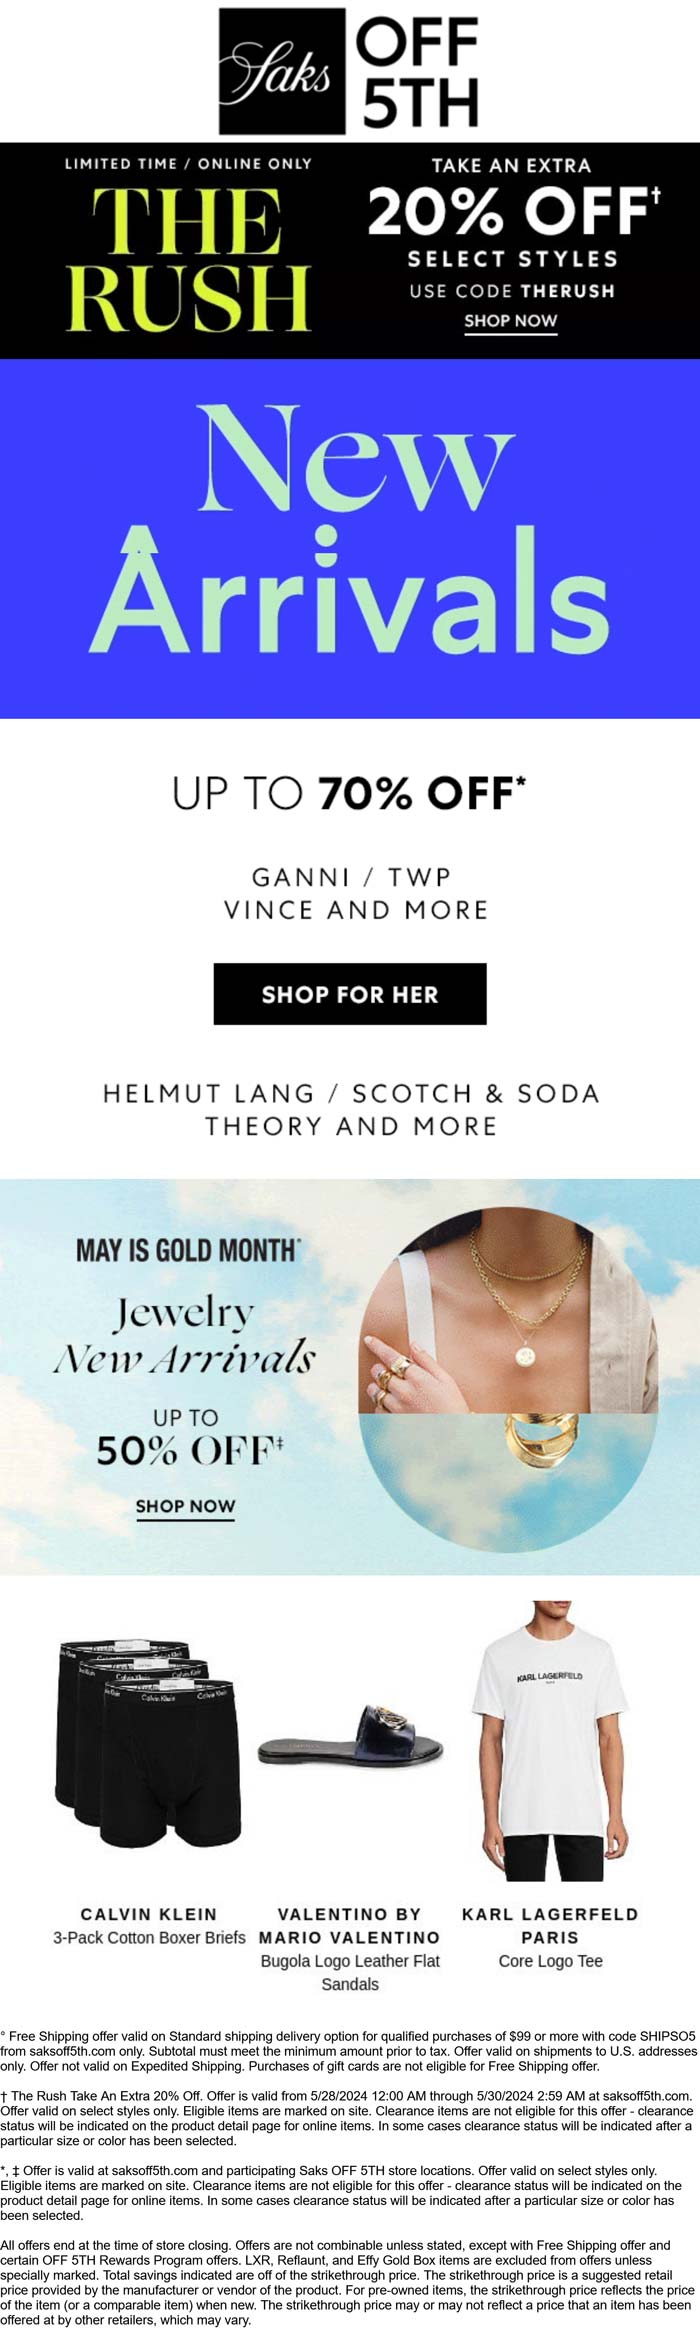 Saks OFF 5TH stores Coupon  20% off online at Saks OFF 5TH via promo code THERUSH #saksoff5th 